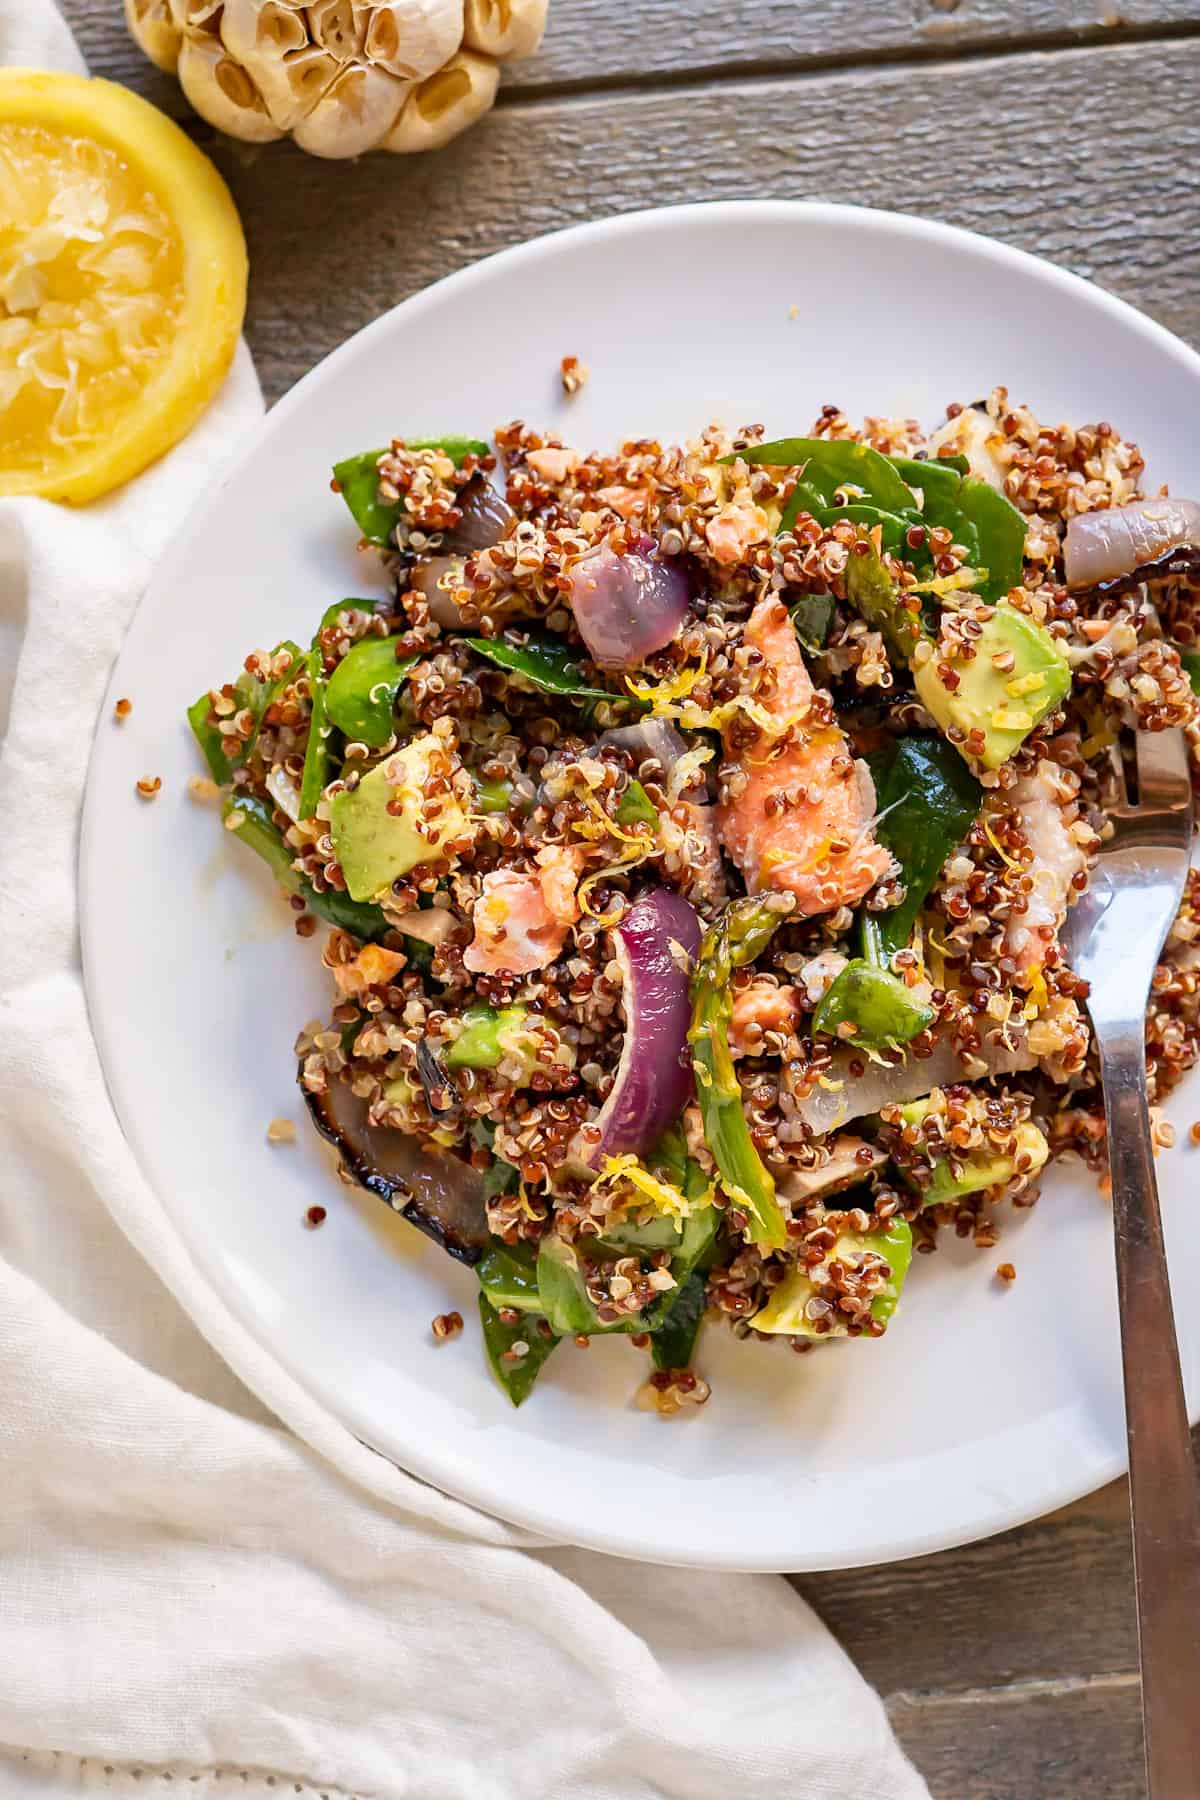 A large meal-sized serving of salmon quinoa bowl on a plate.